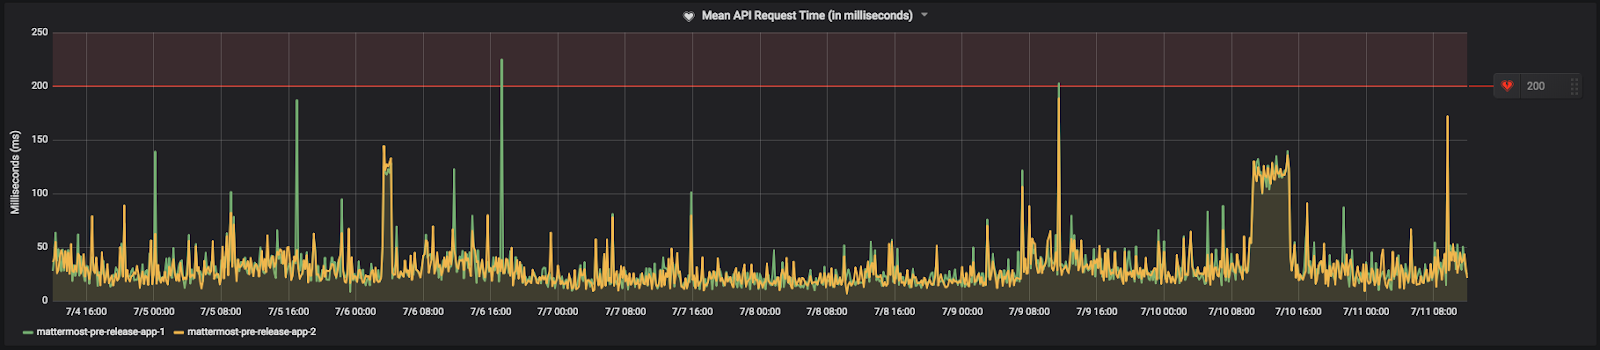 Example mean API request time metrics for the Mattermost Community Server, where the alert threshold is configured a bit above the mean request time during peak load times.